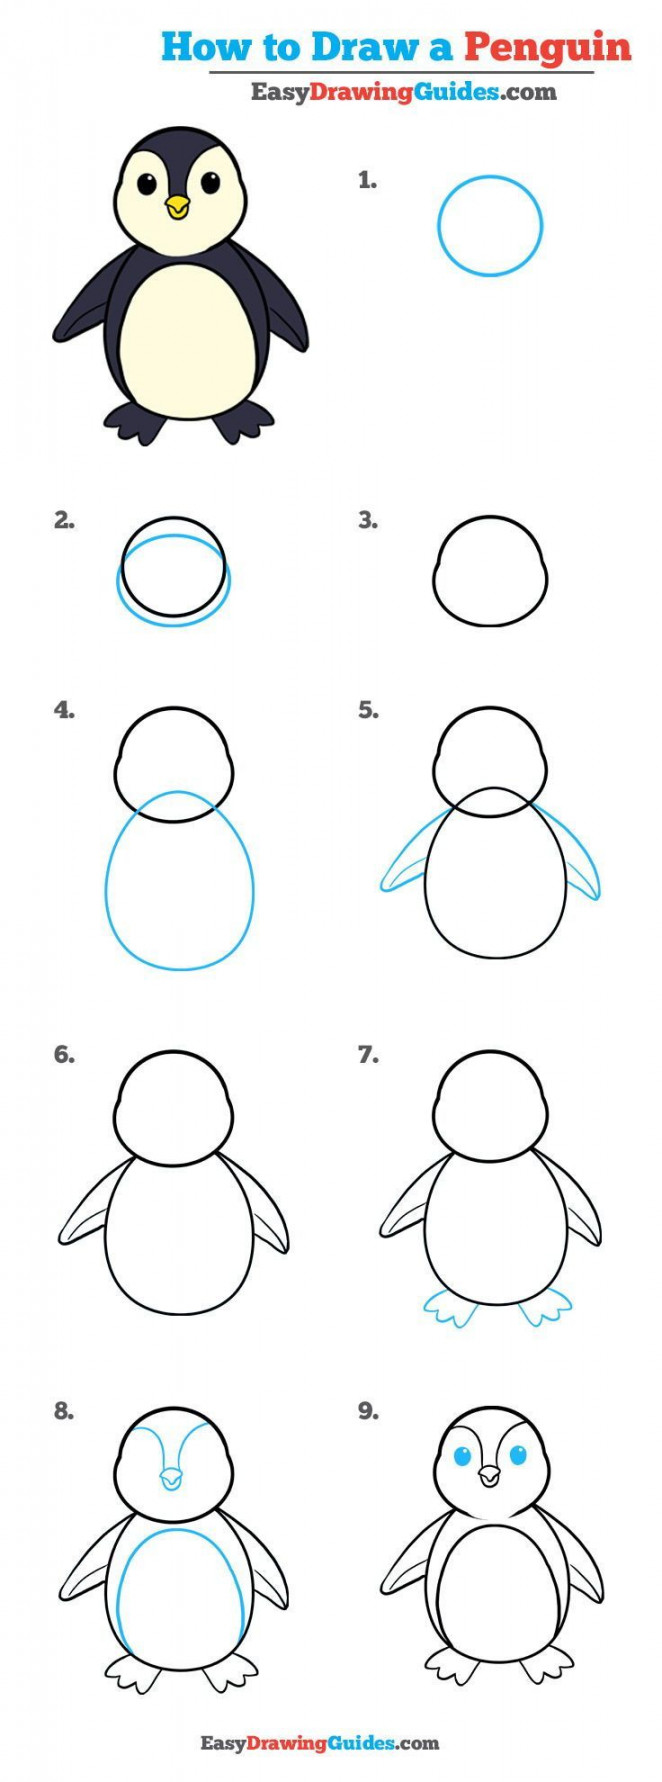 Learn How to Draw a Penguin: Easy Step-by-Step Drawing Tutorial